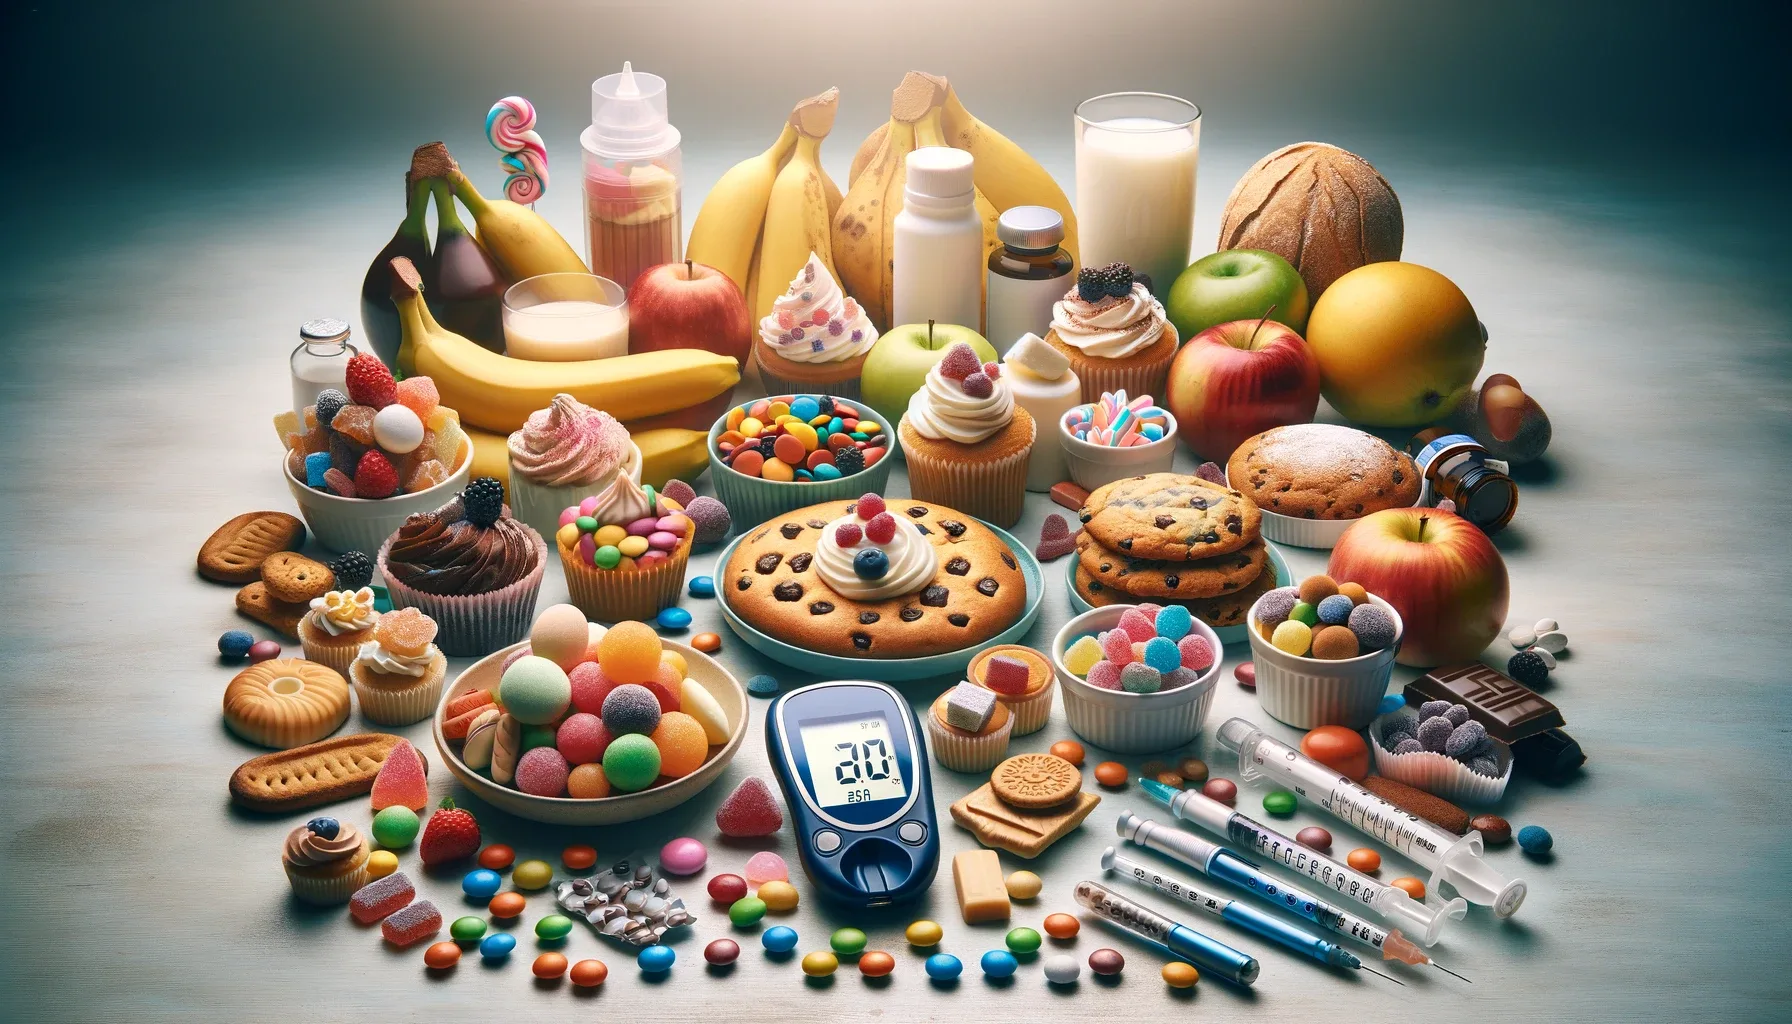 A blood sugar monitor surrounded by various foods, including sweets.